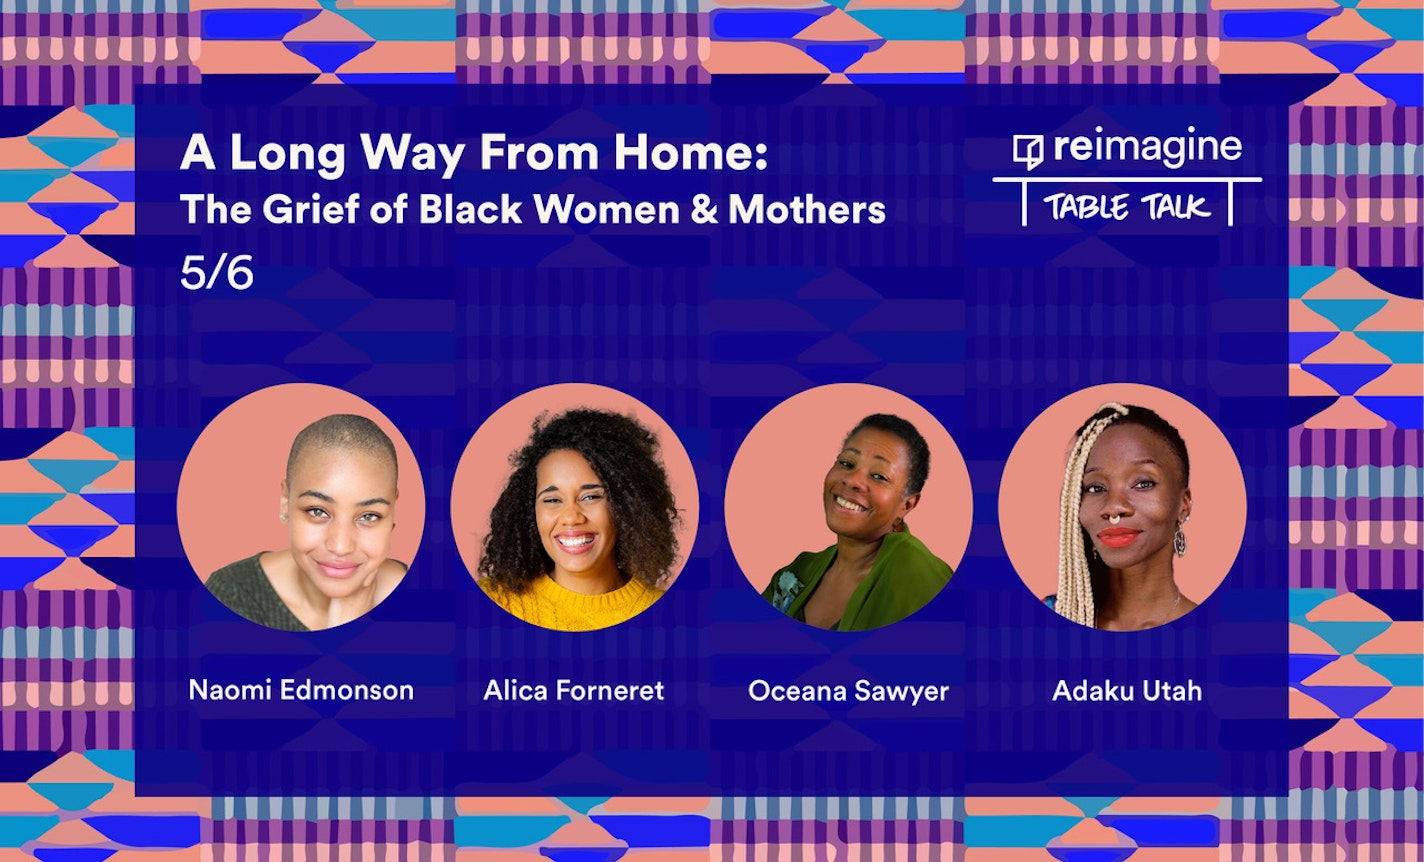 A Long Way From Home: The Grief of Black Women & Mothers